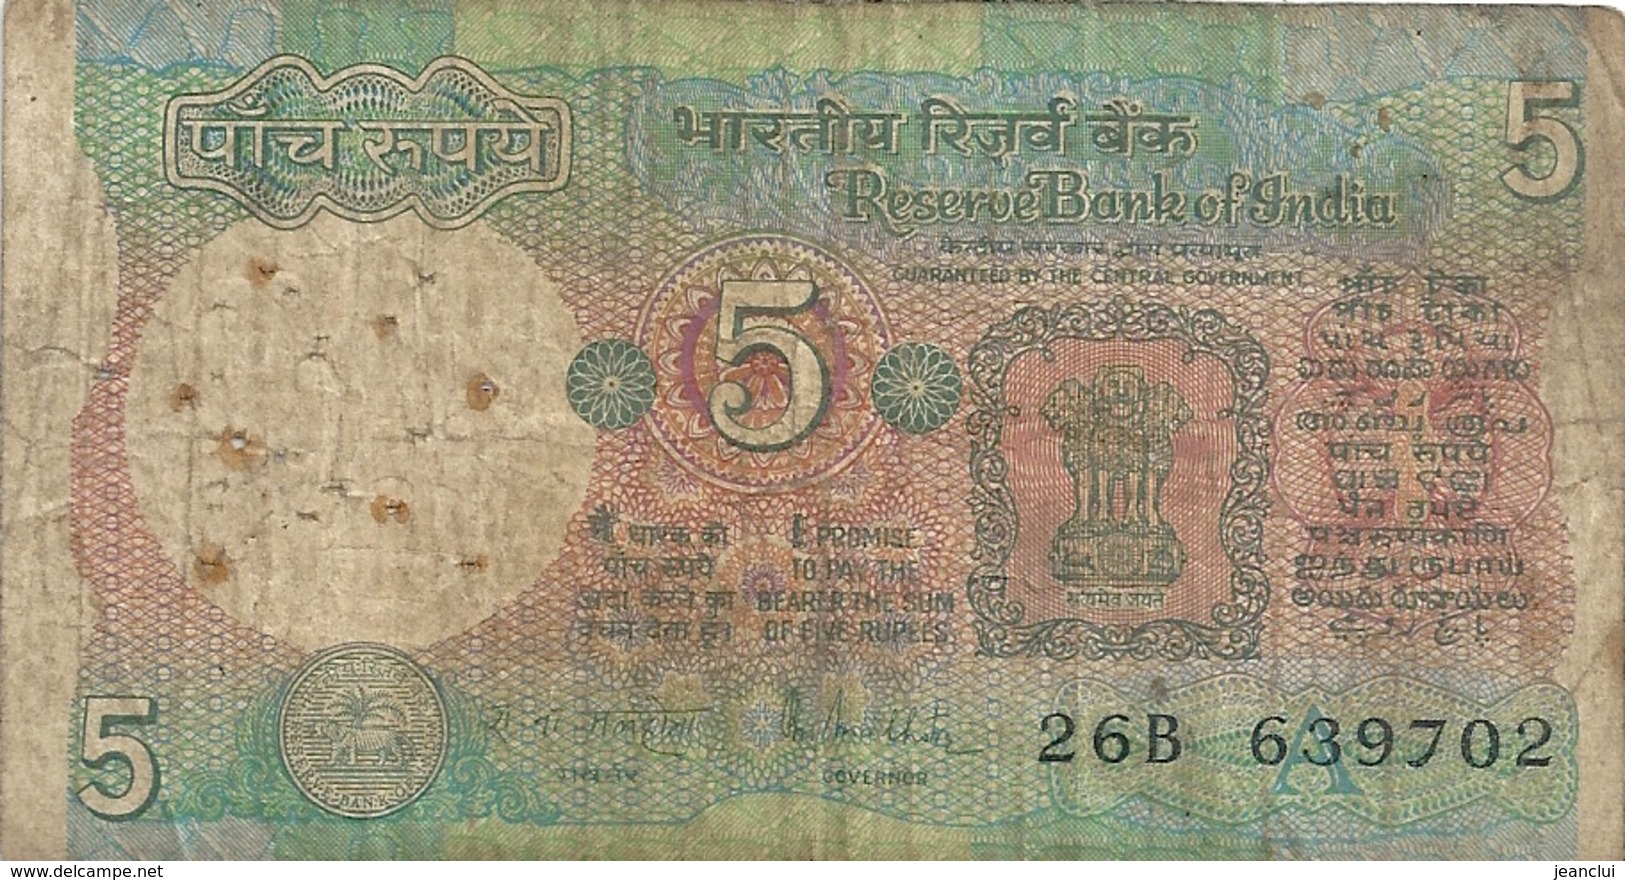 RESERVE BANK OF INDIA - 5 RUPPEES . N° 26B 639702  - 2 SCANES - Inde